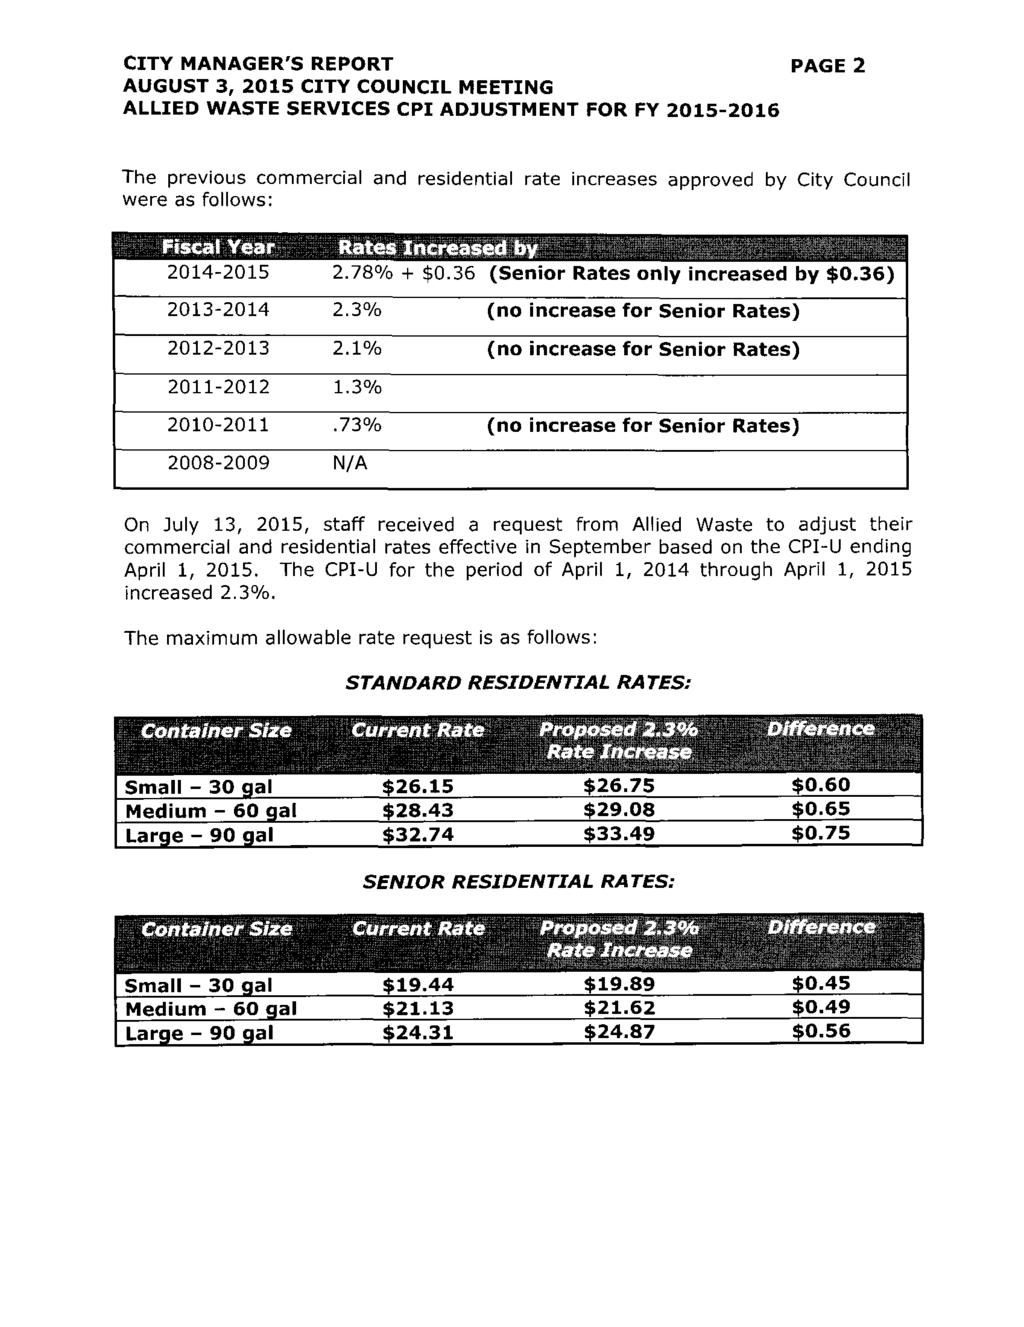 CITY MANAGER S REPORT PAGE 2 AUGUST 3 2015 CITY COUNCIL MEETING ALLIED WASTE SERVICES CPI ADJUSTMENT FOR FY 2015 2016 The previous commercial and residential rate increases approved by City Council